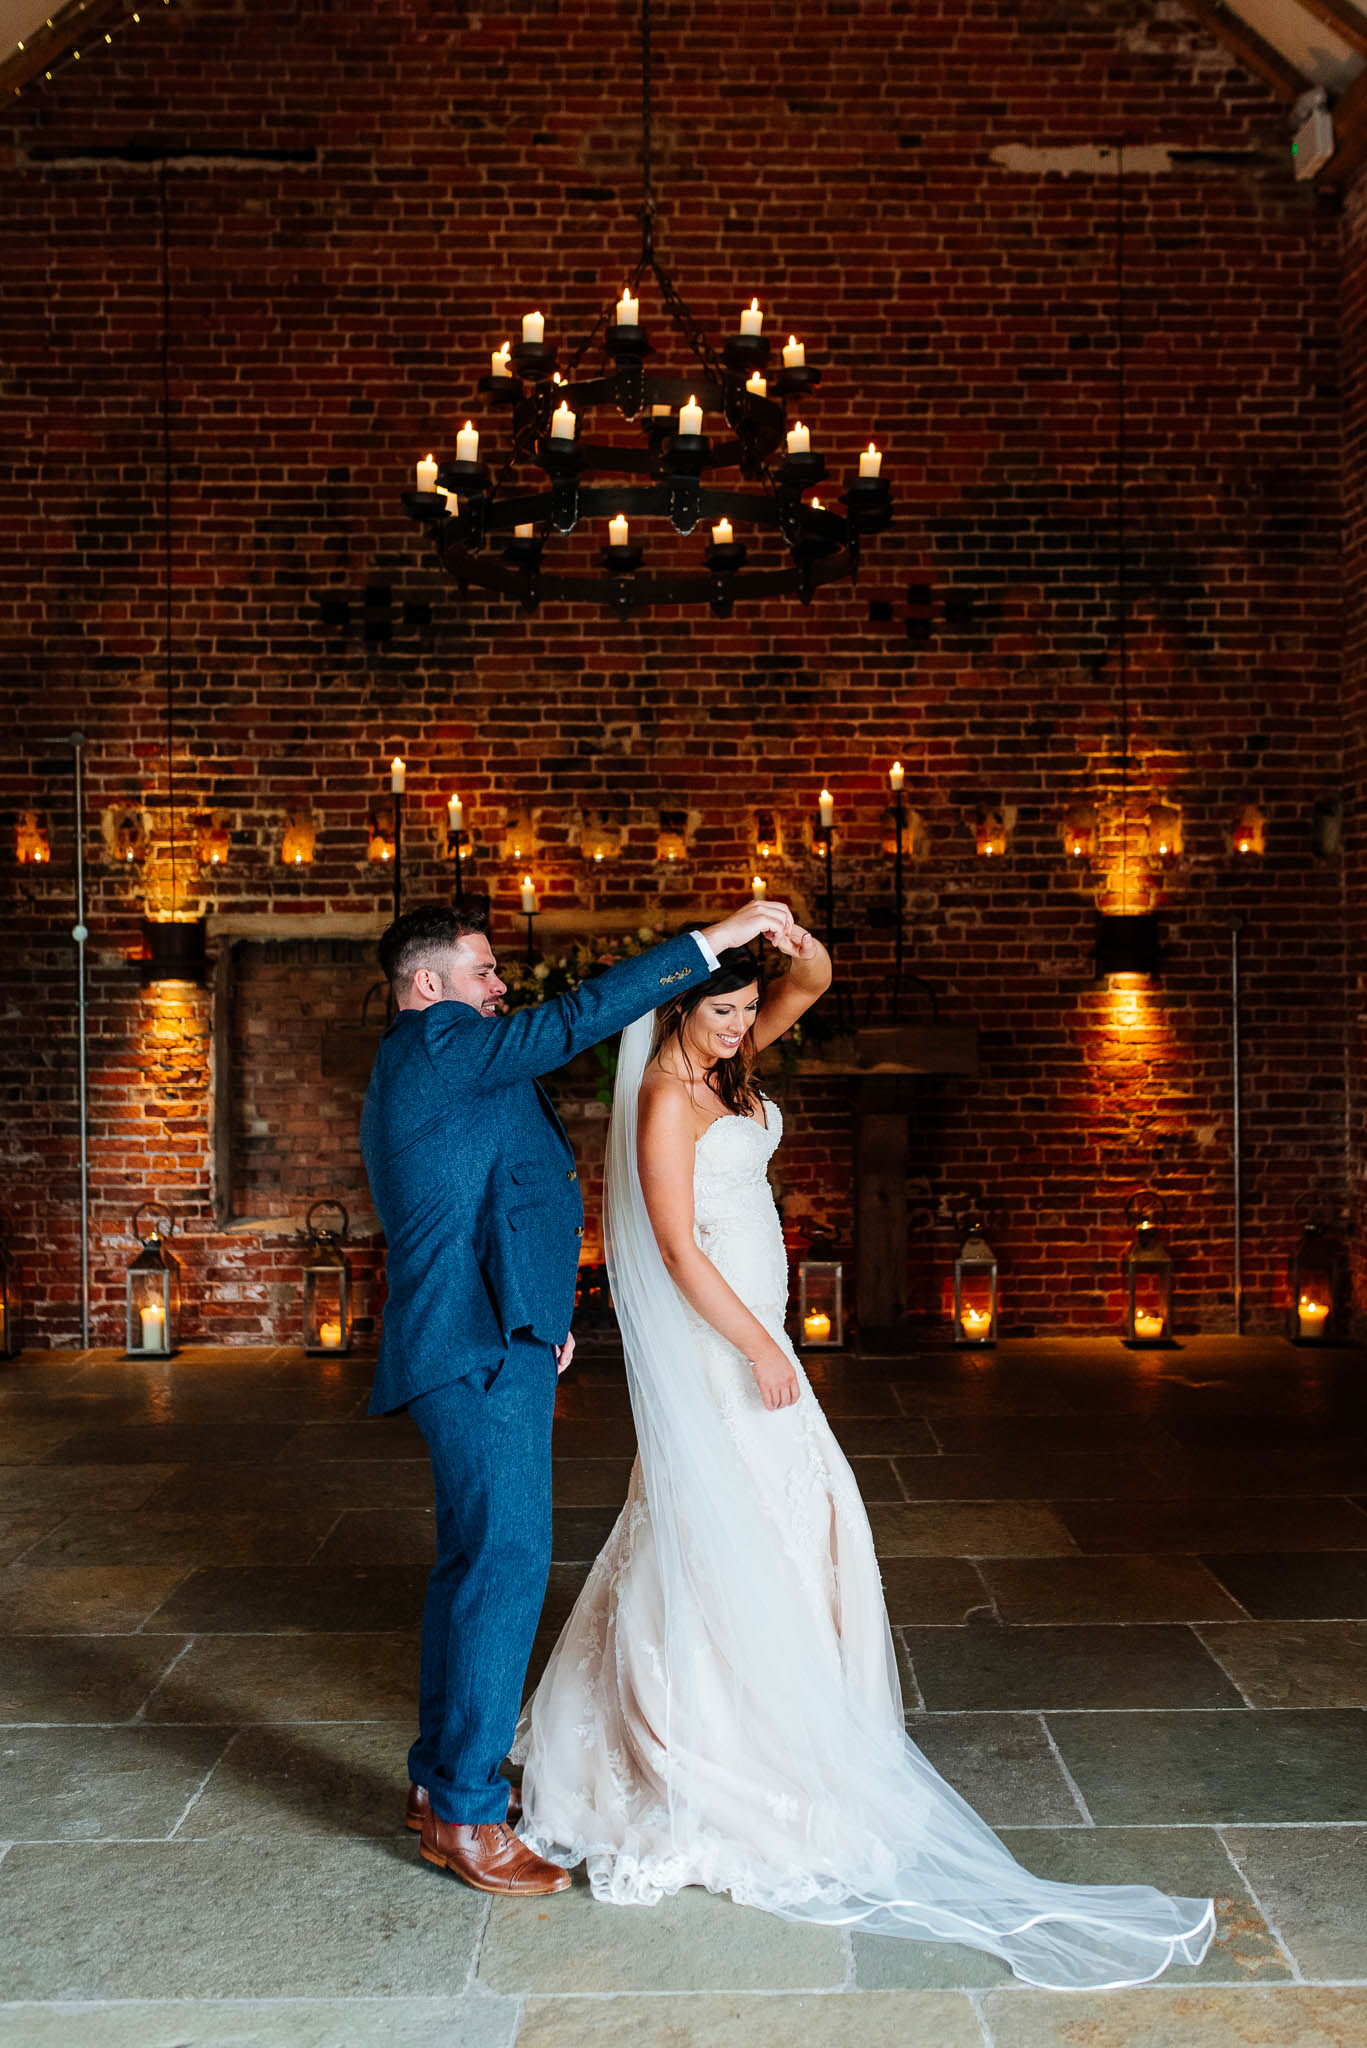 Bride and groom twirl in the main barn lit with candles.